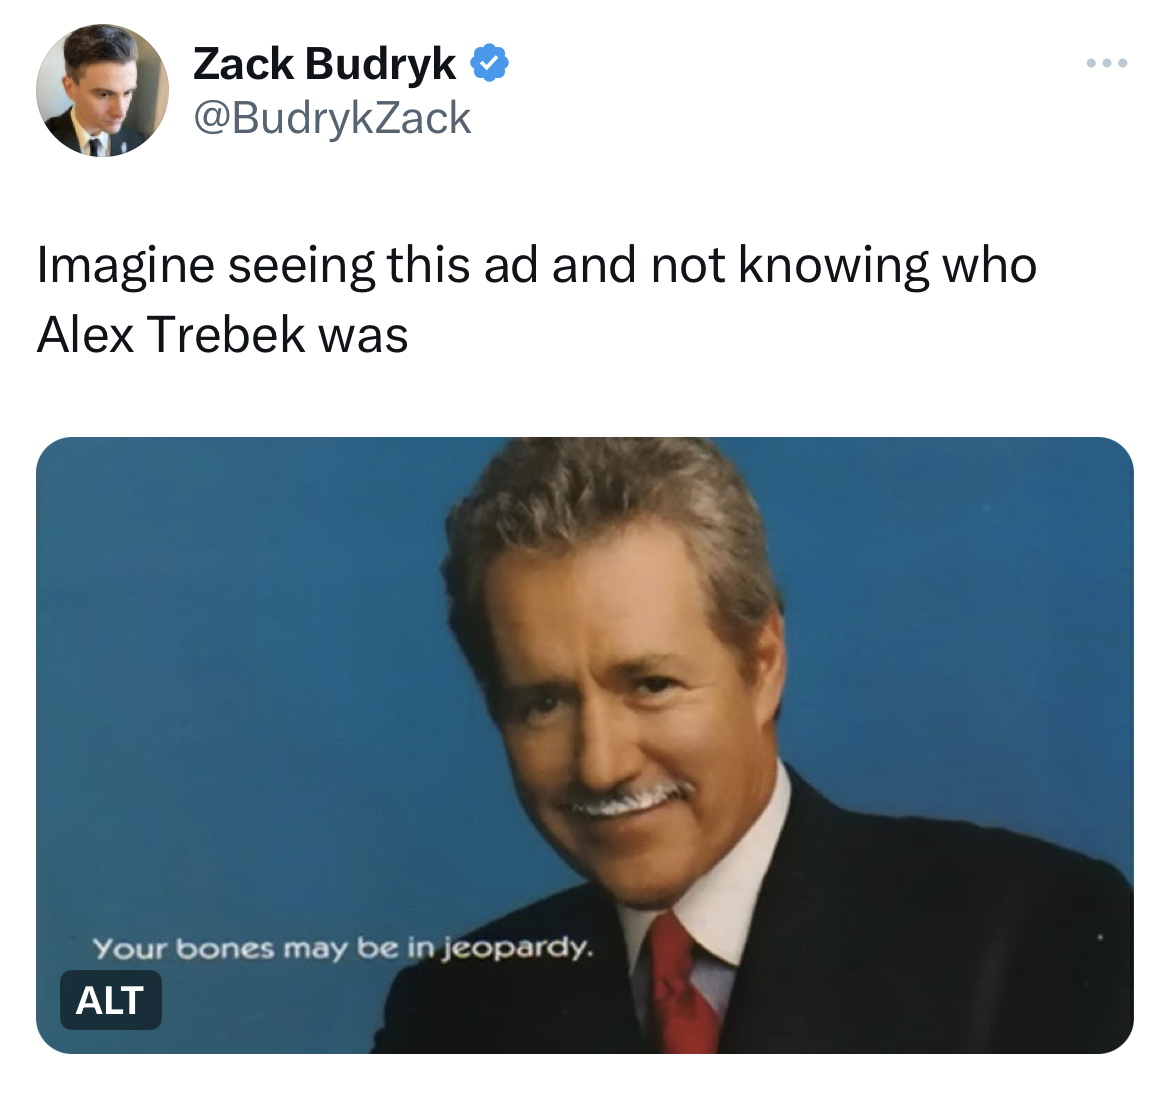 savage absurd tweets presentation - Zack Budryk Imagine seeing this ad and not knowing who Alex Trebek was Your bones may be in jeopardy. Alt